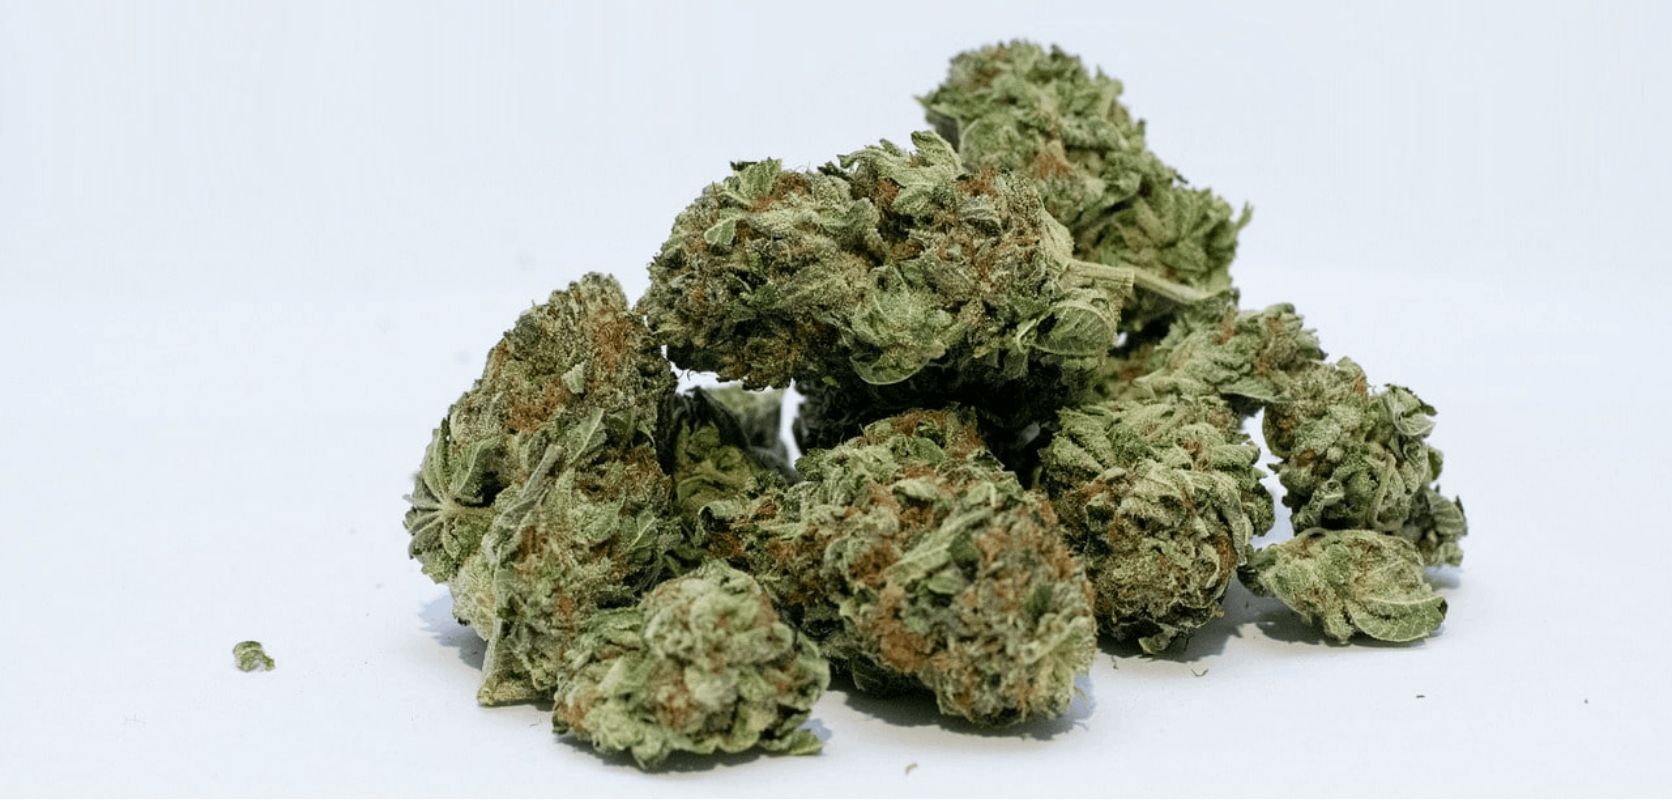 An extensive selection allows you to find cheap weed in Vancouver that meets your specific preferences and requirements.